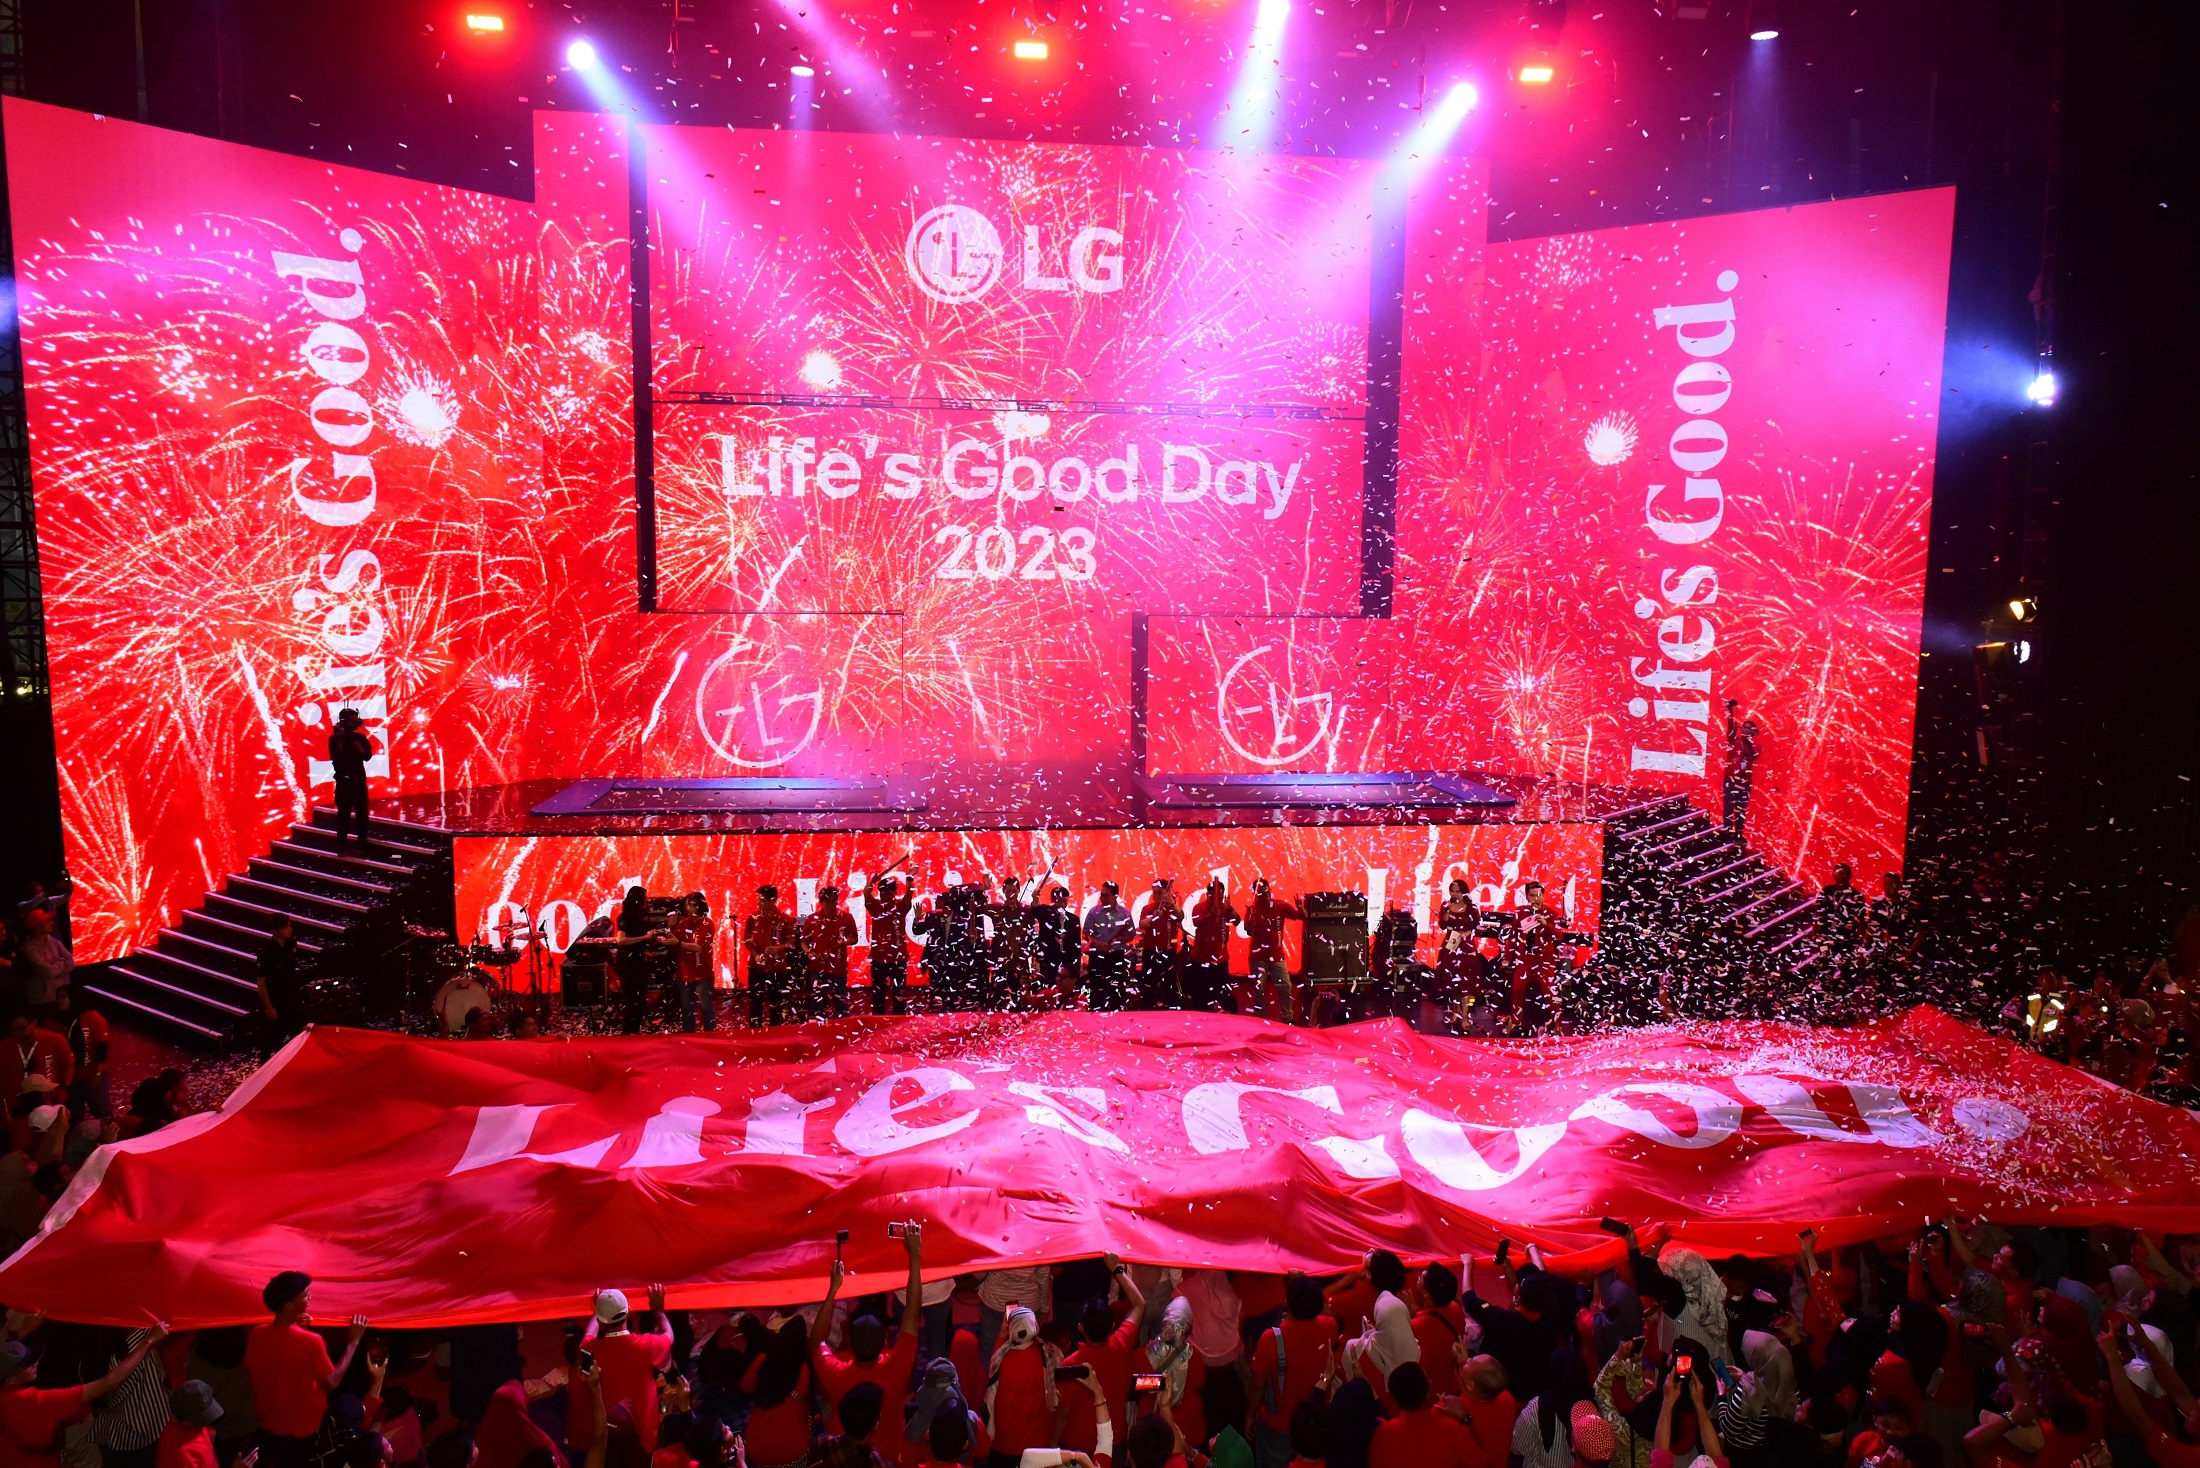 A photo of a celebration happening on stage the LG Life's Good Day 2023 event